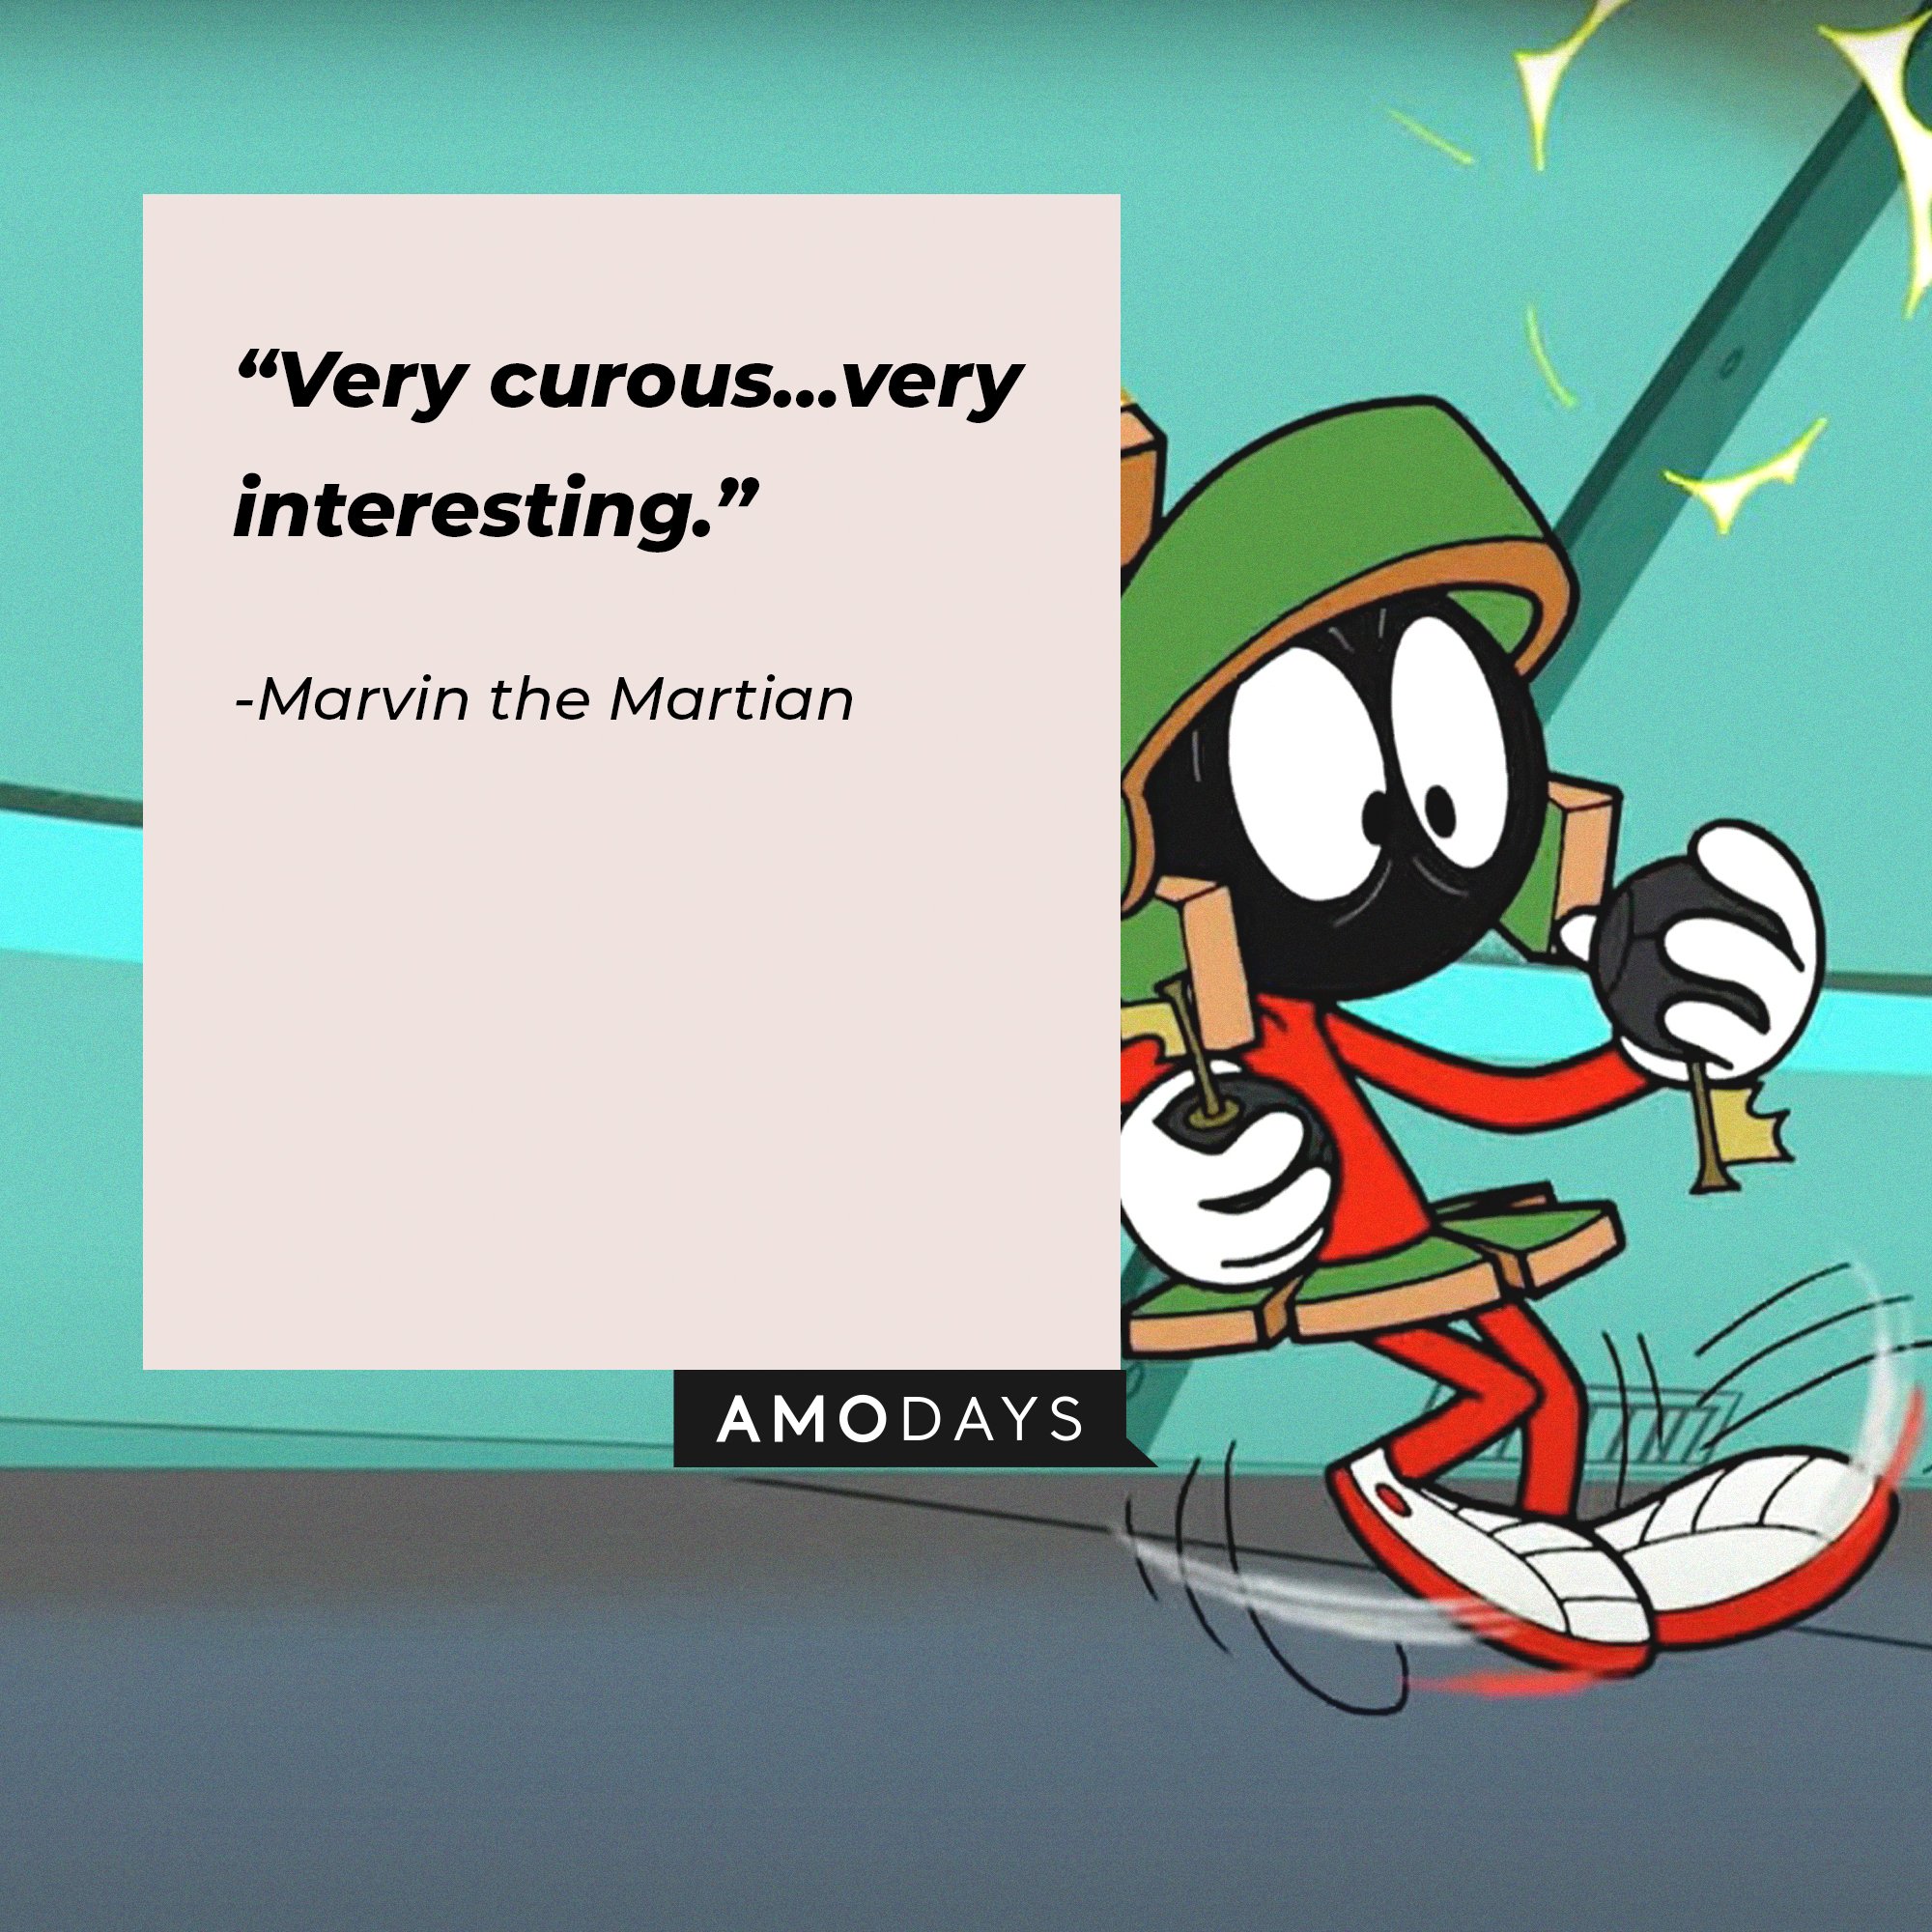 Marvin the Martian’s quote: “Very curious…very interesting." | Image: AmoDays